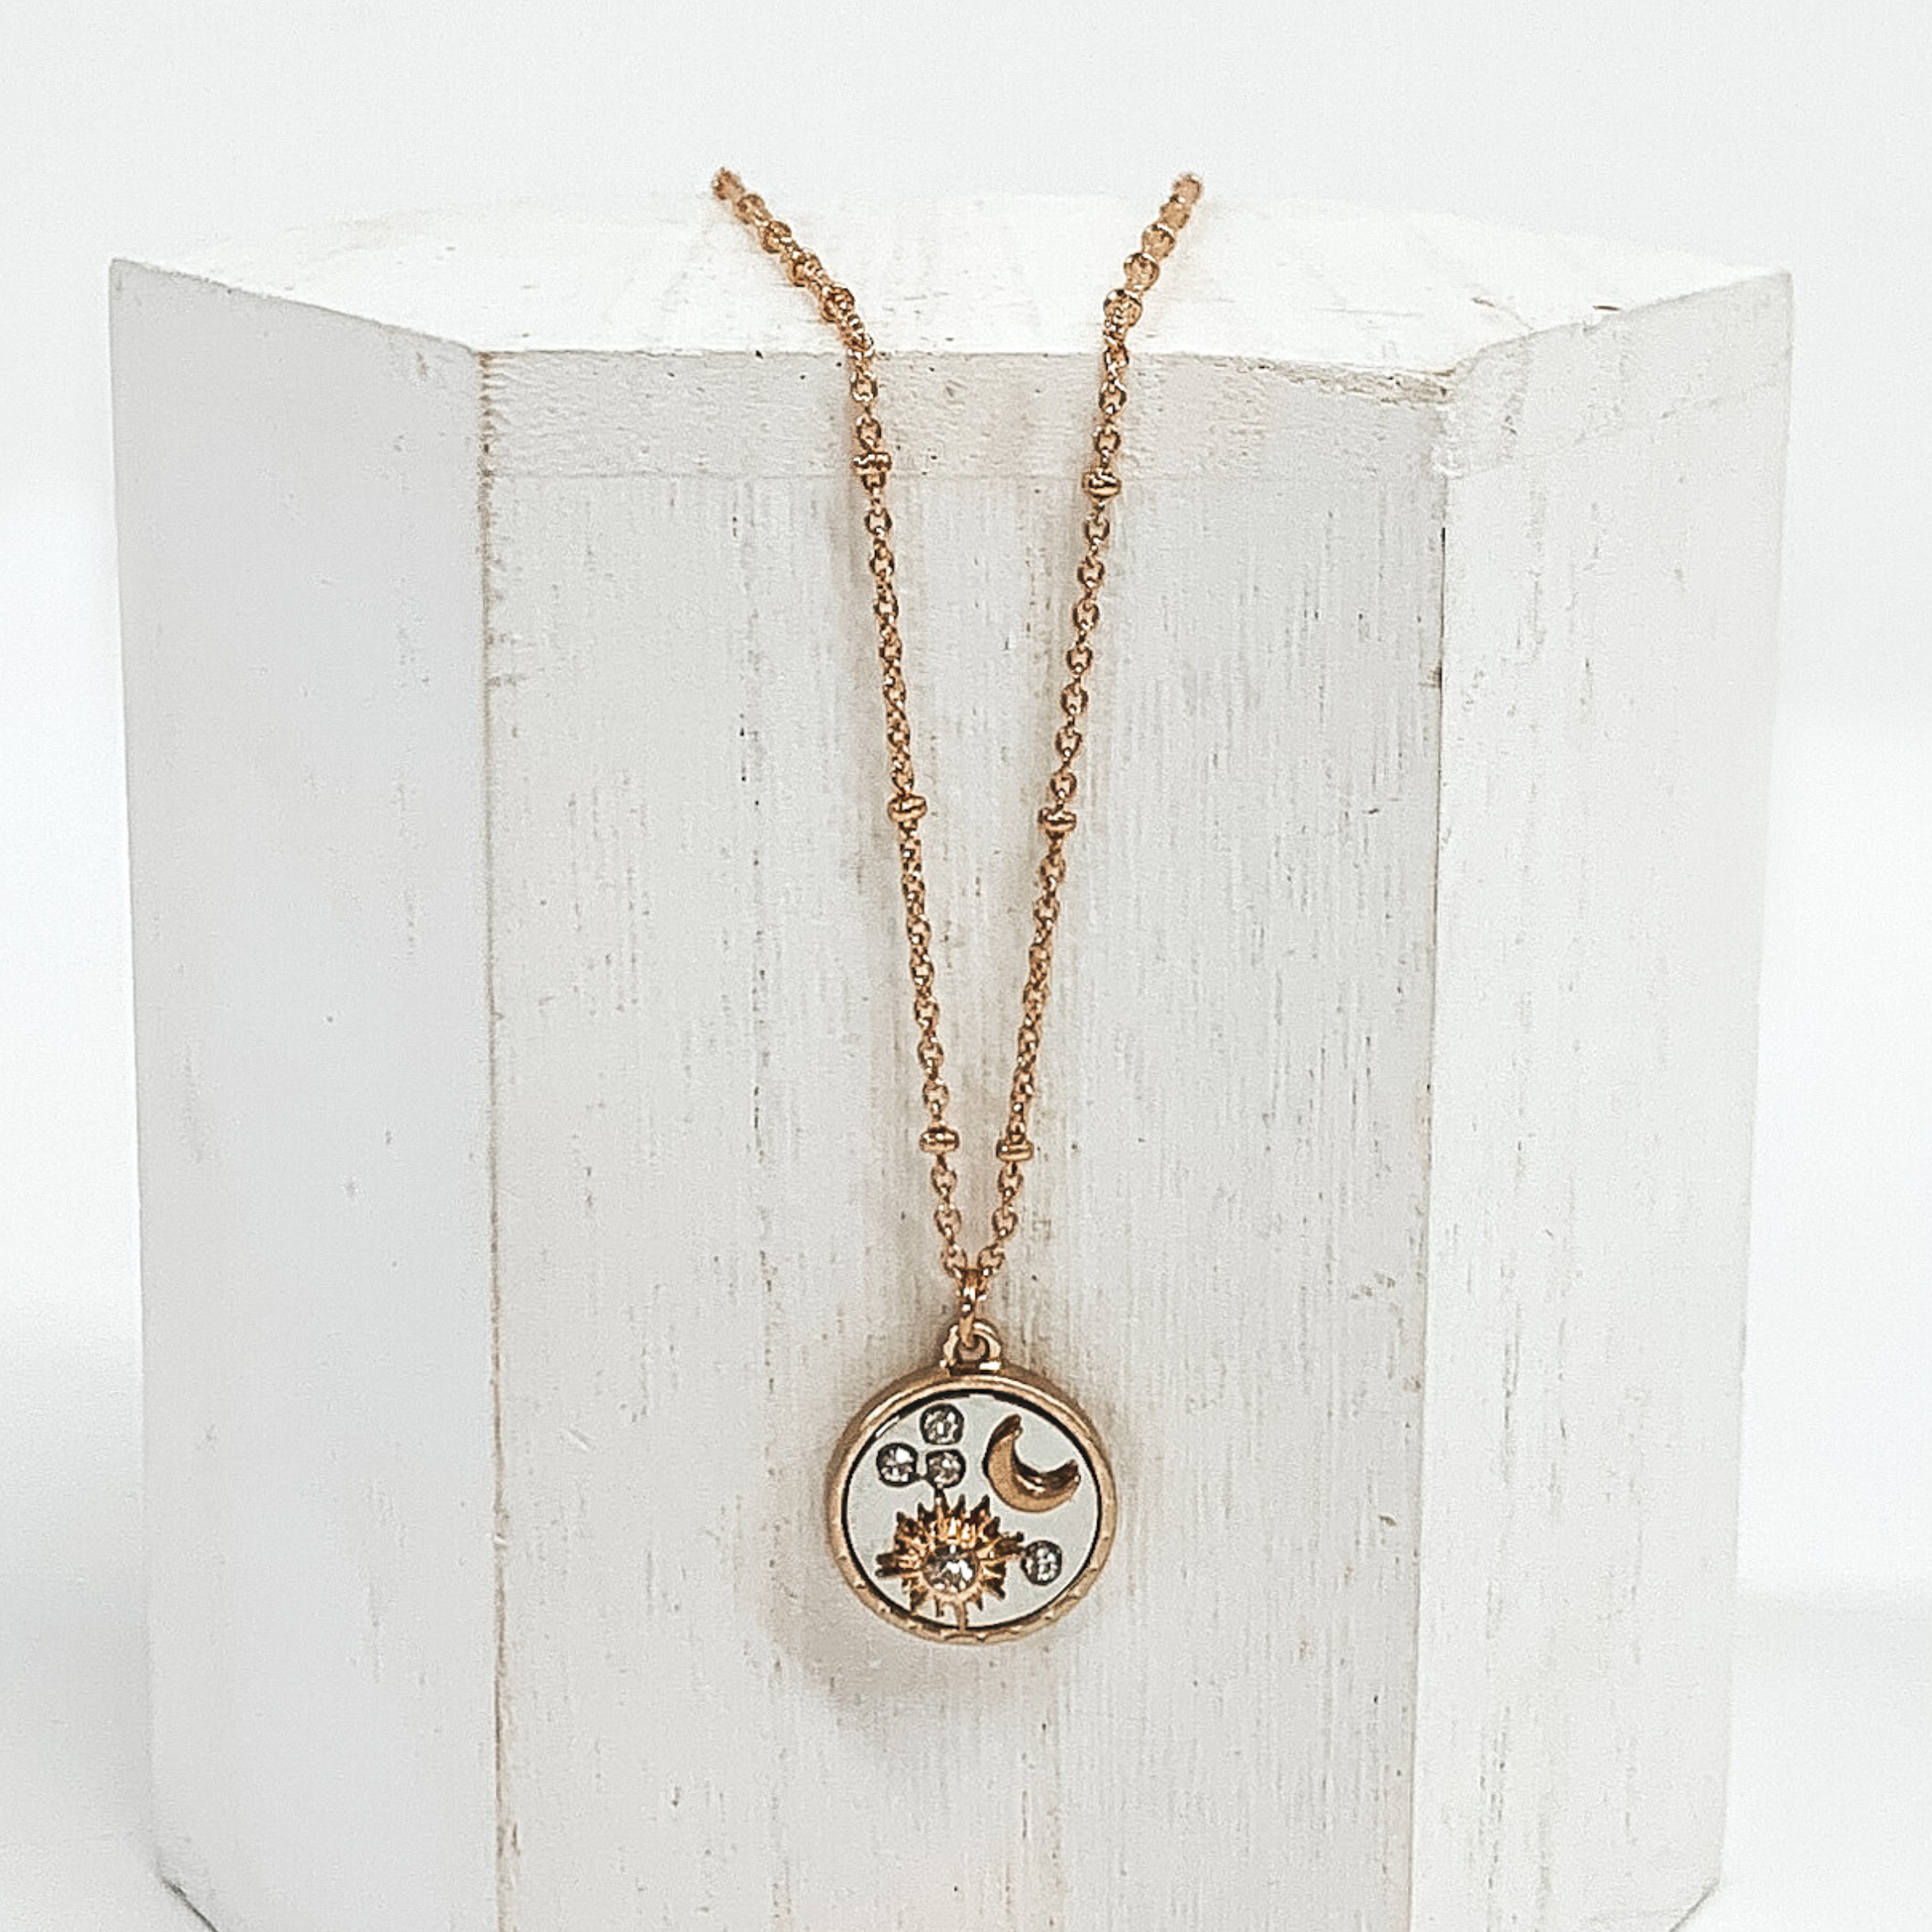 Gold necklace with gold circle pendant with a silver inlay. The circle pendant has clear round circles, a gold star, and a gold moon. This necklace is pictured on a white block and on a white background.